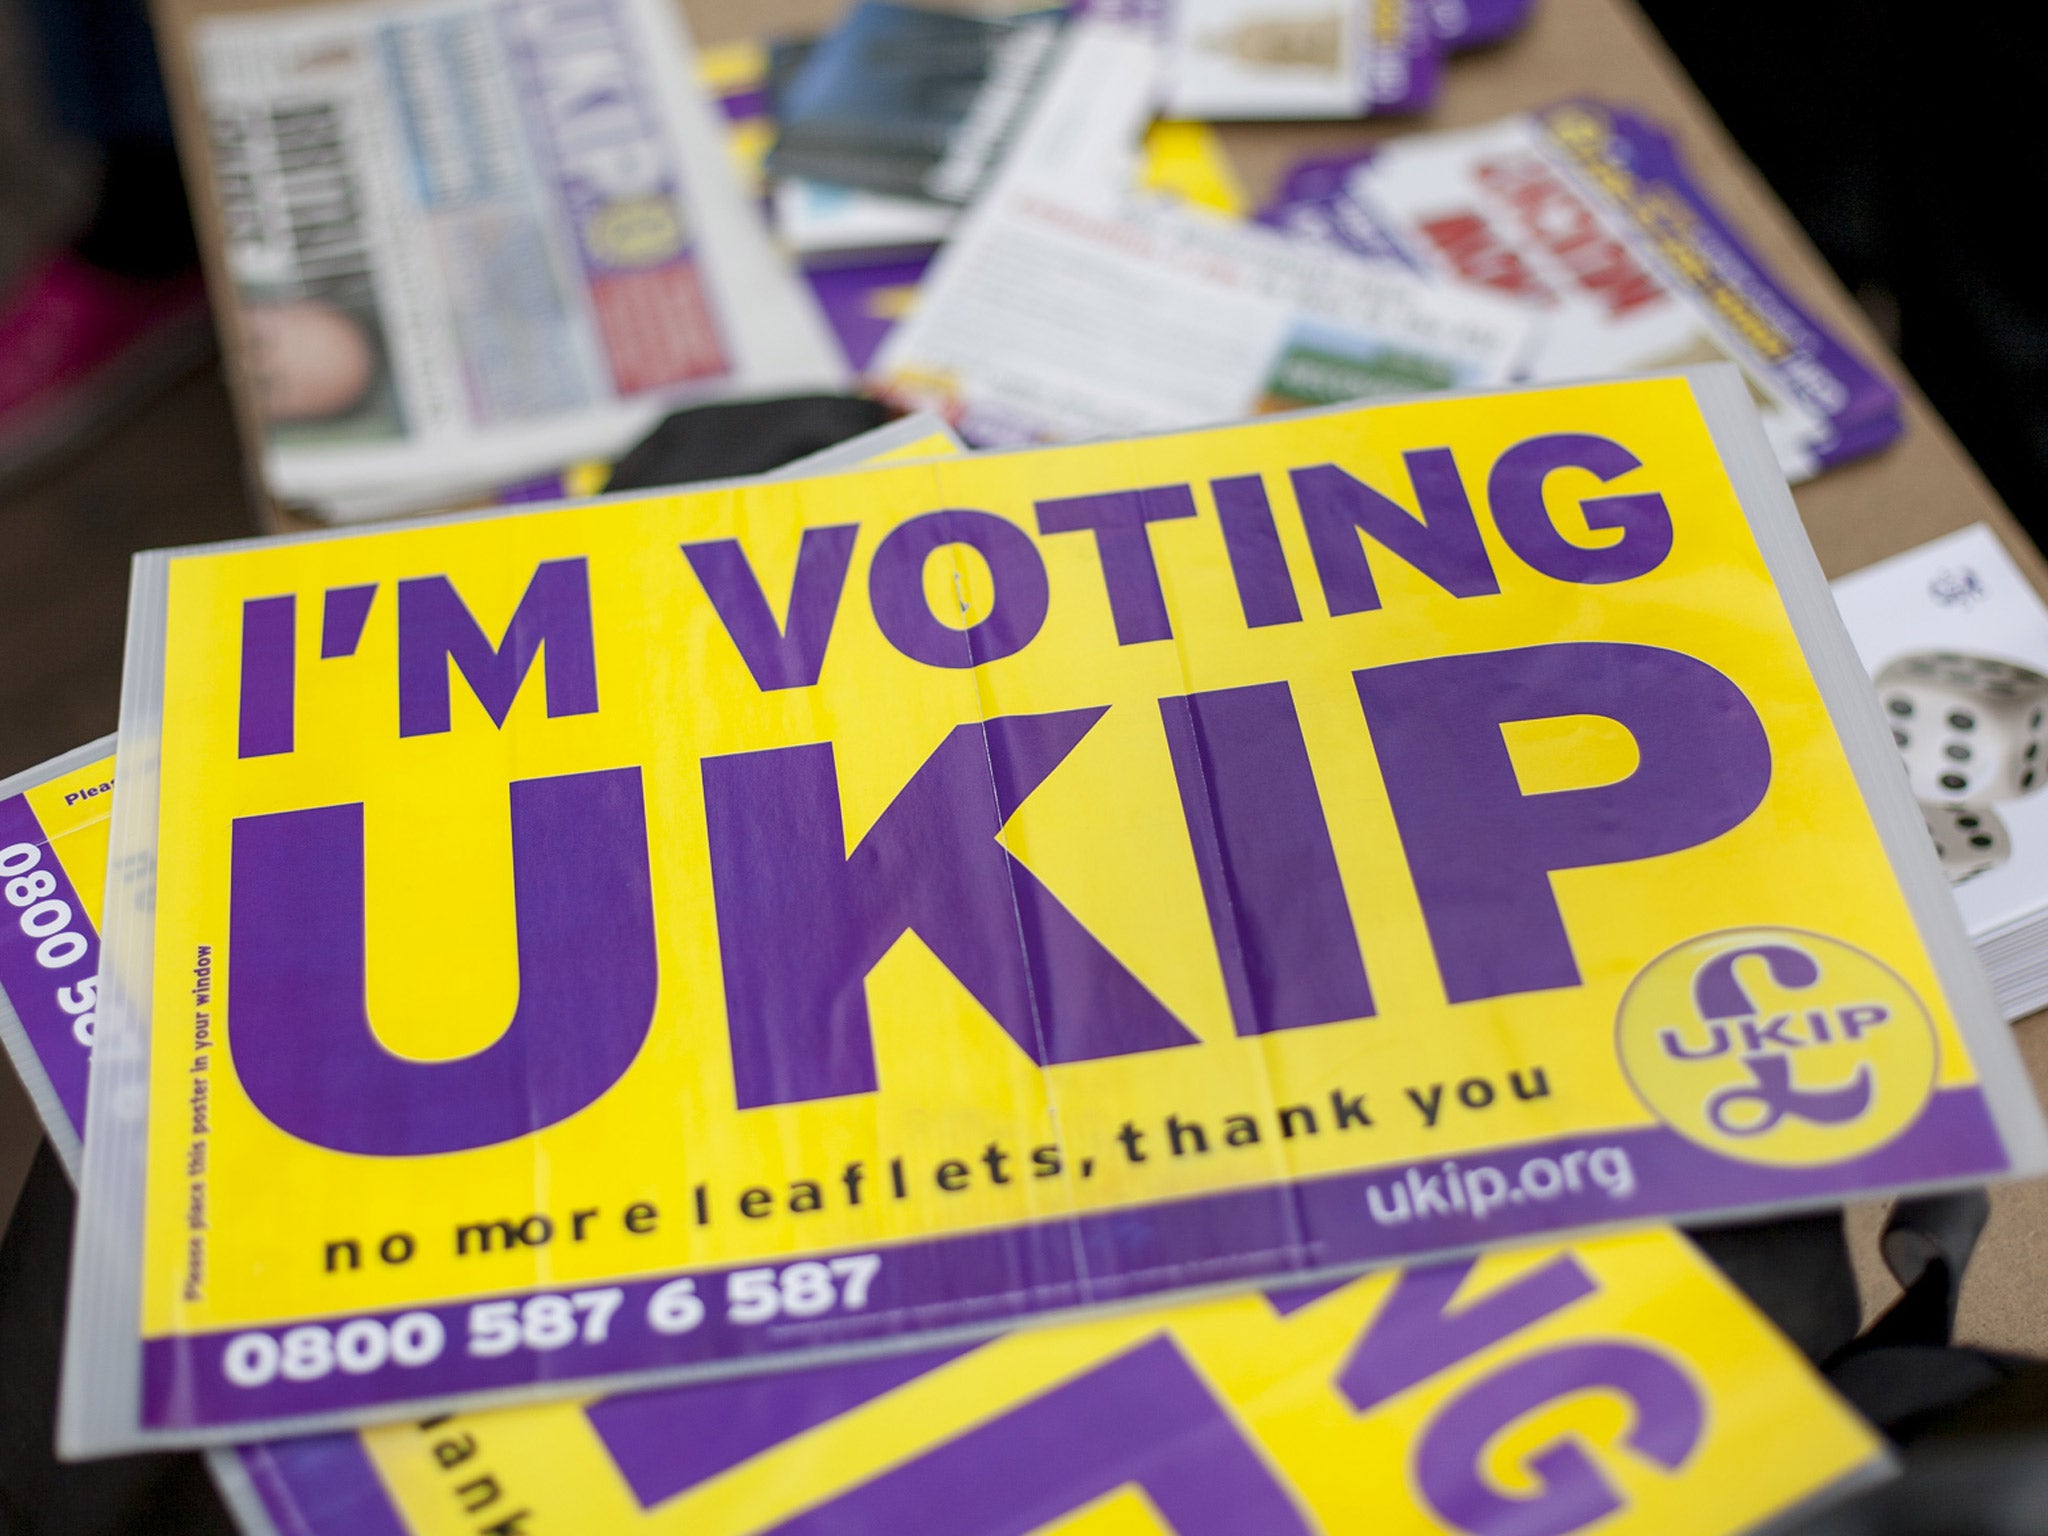 Ukip’s campaign was marred by allegations of racism